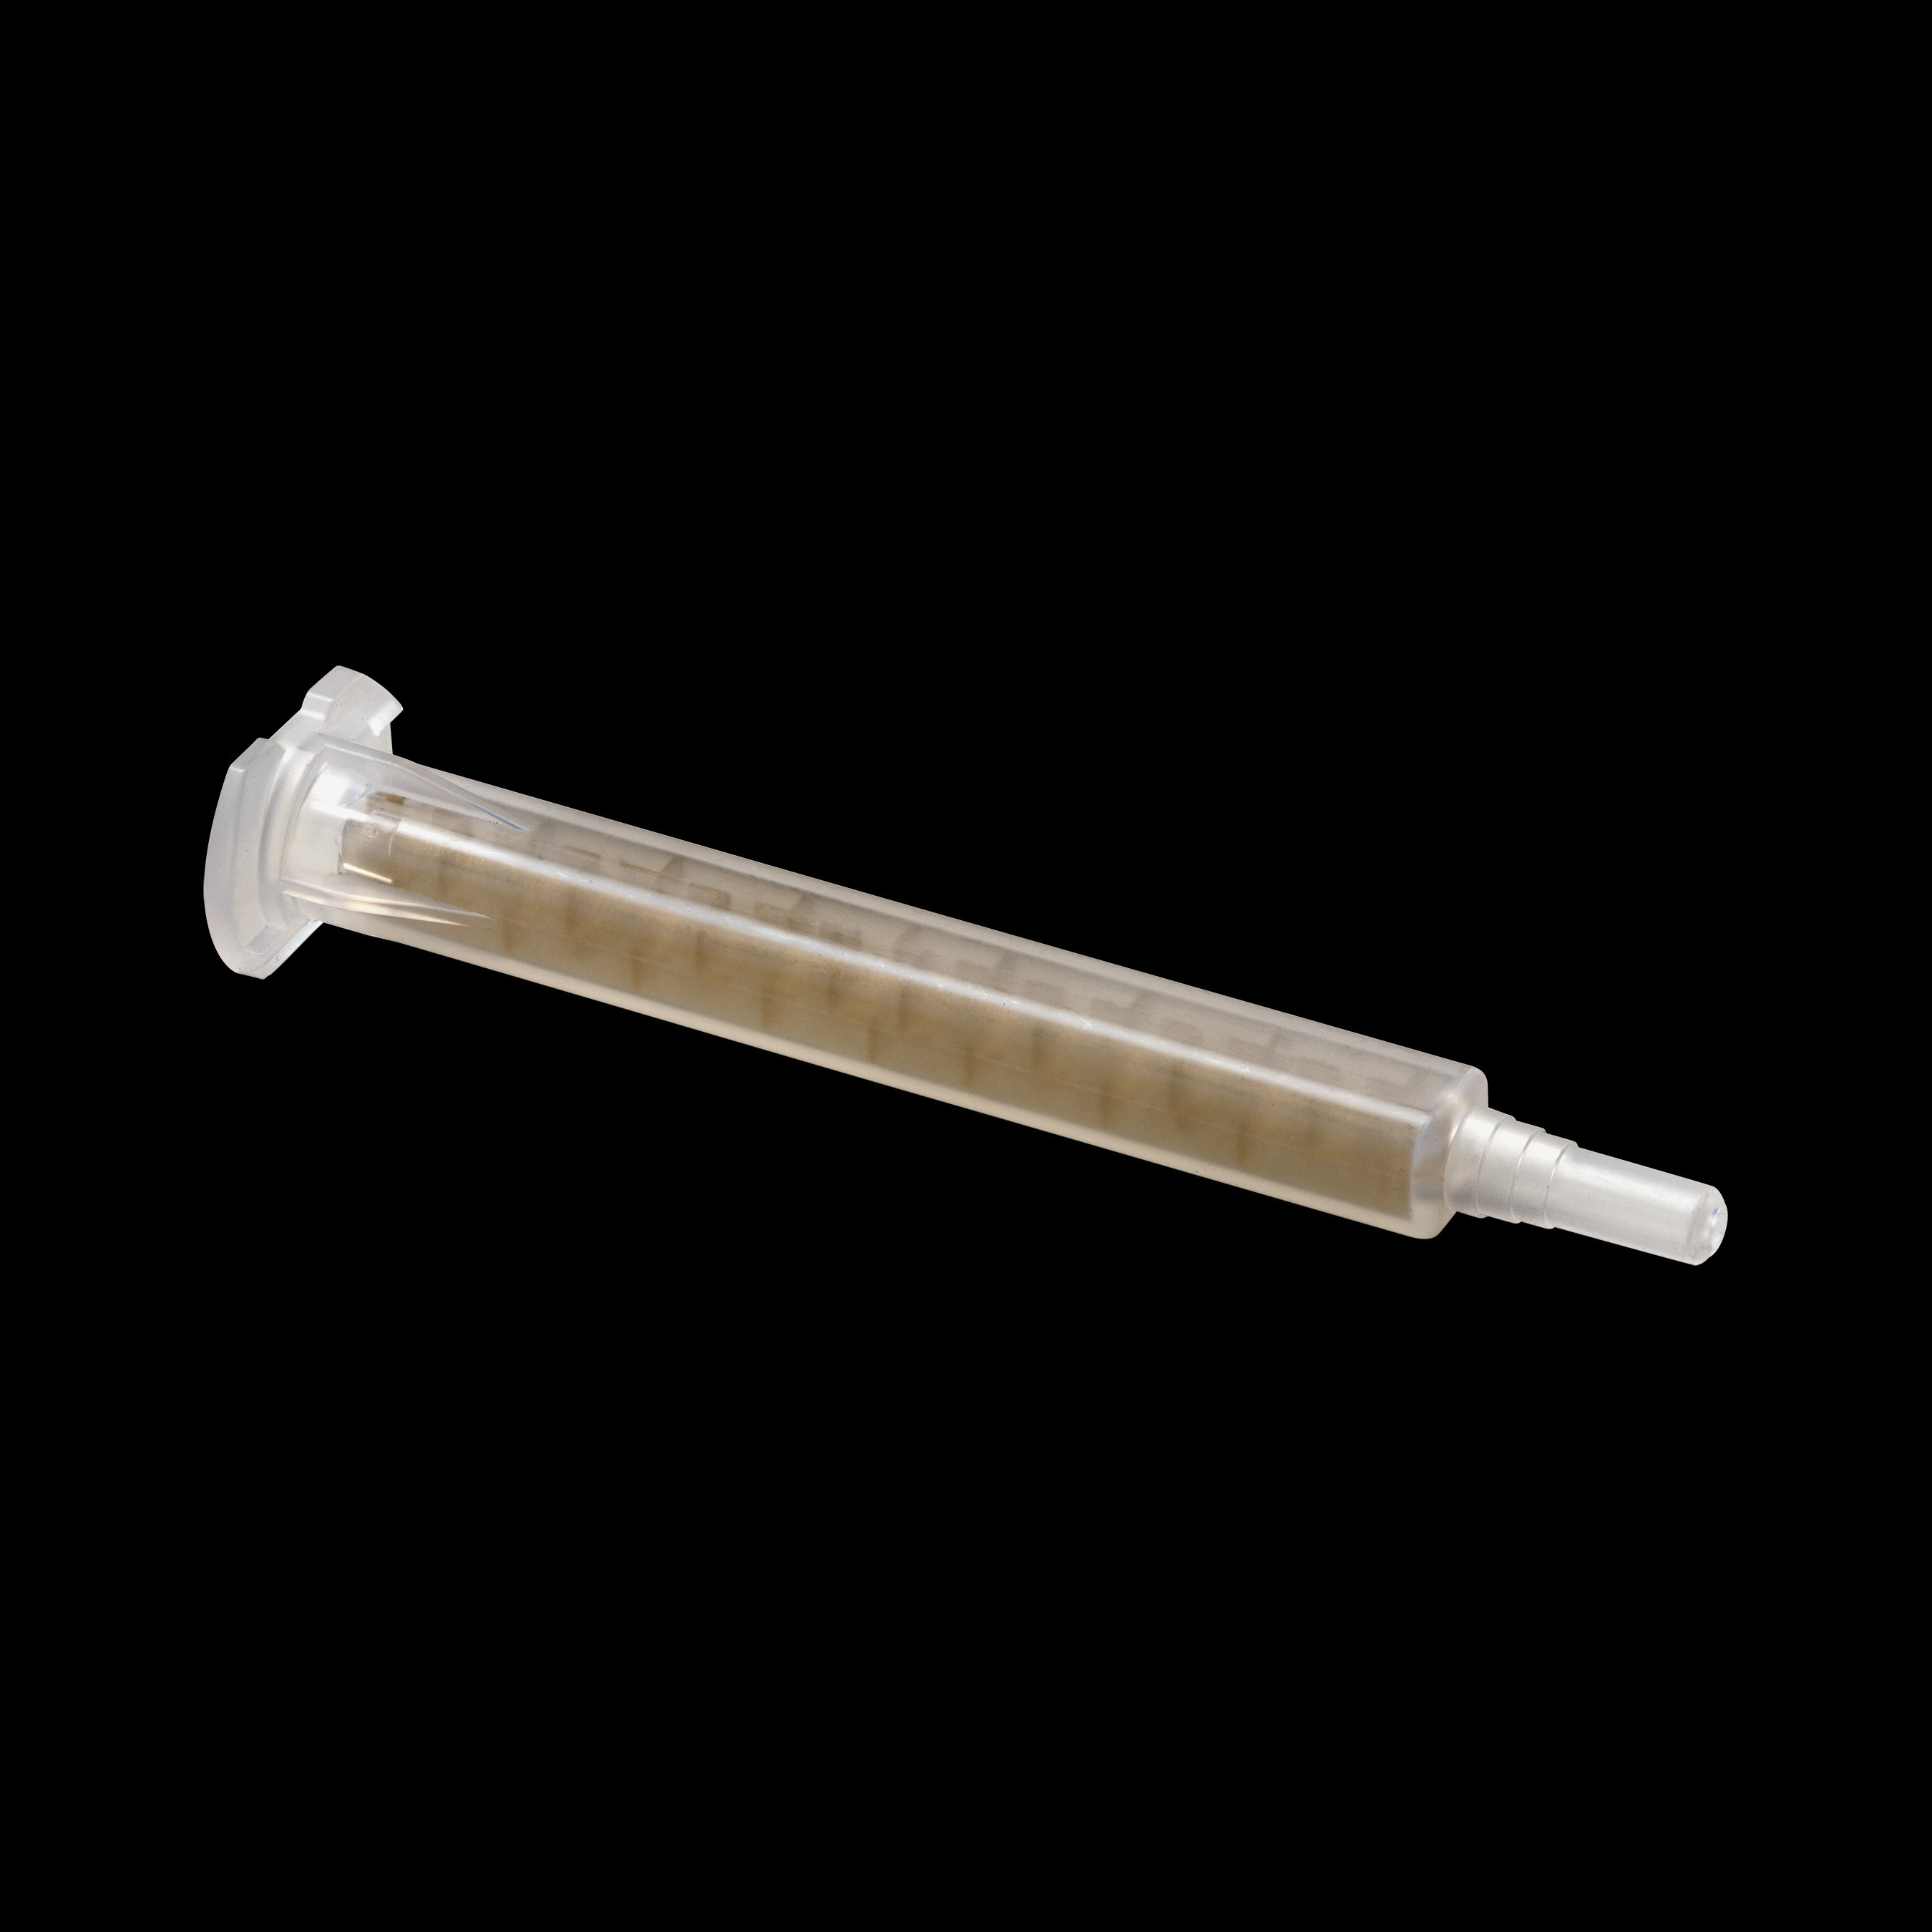 Scotch-Weld™ EPX™ 021200-50006 Cartridge Plunger, For Use With 3M™ Scotch-Weld™ EPX™ 45 mL Manual Applicatorss, 2:1 Mixing Ratio